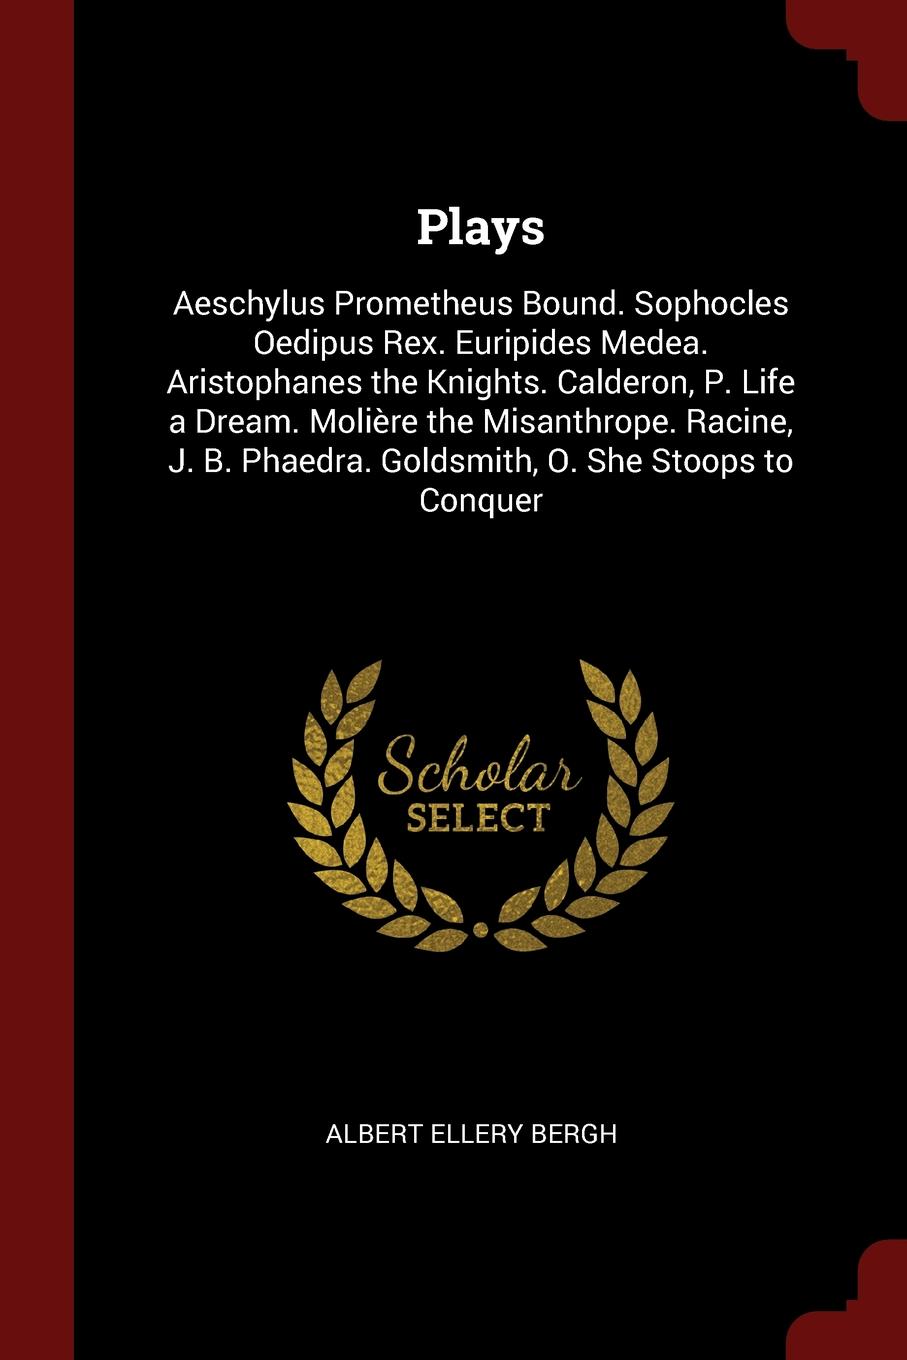 Plays. Aeschylus Prometheus Bound. Sophocles Oedipus Rex. Euripides Medea. Aristophanes the Knights. Calderon, P. Life a Dream. Moliere the Misanthrope. Racine, J. B. Phaedra. Goldsmith, O. She Stoops to Conquer